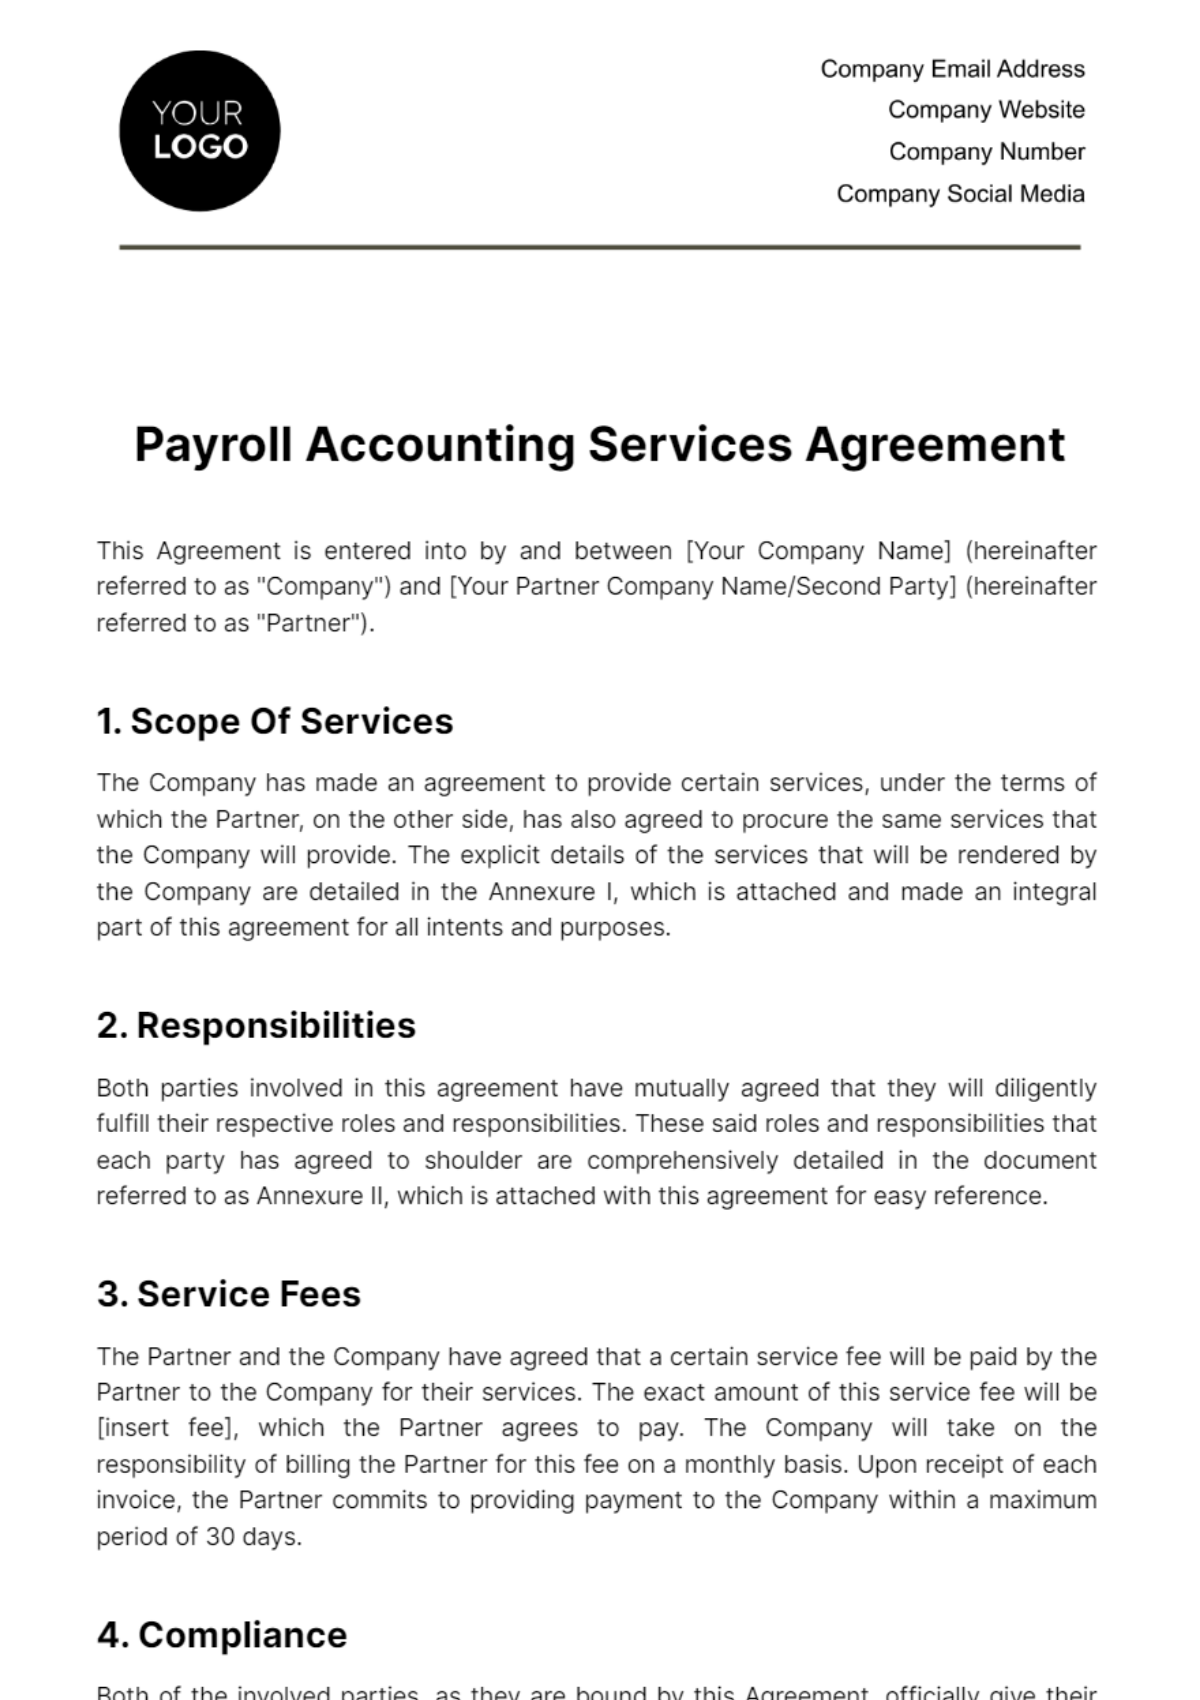 Payroll Accounting Services Agreement Template